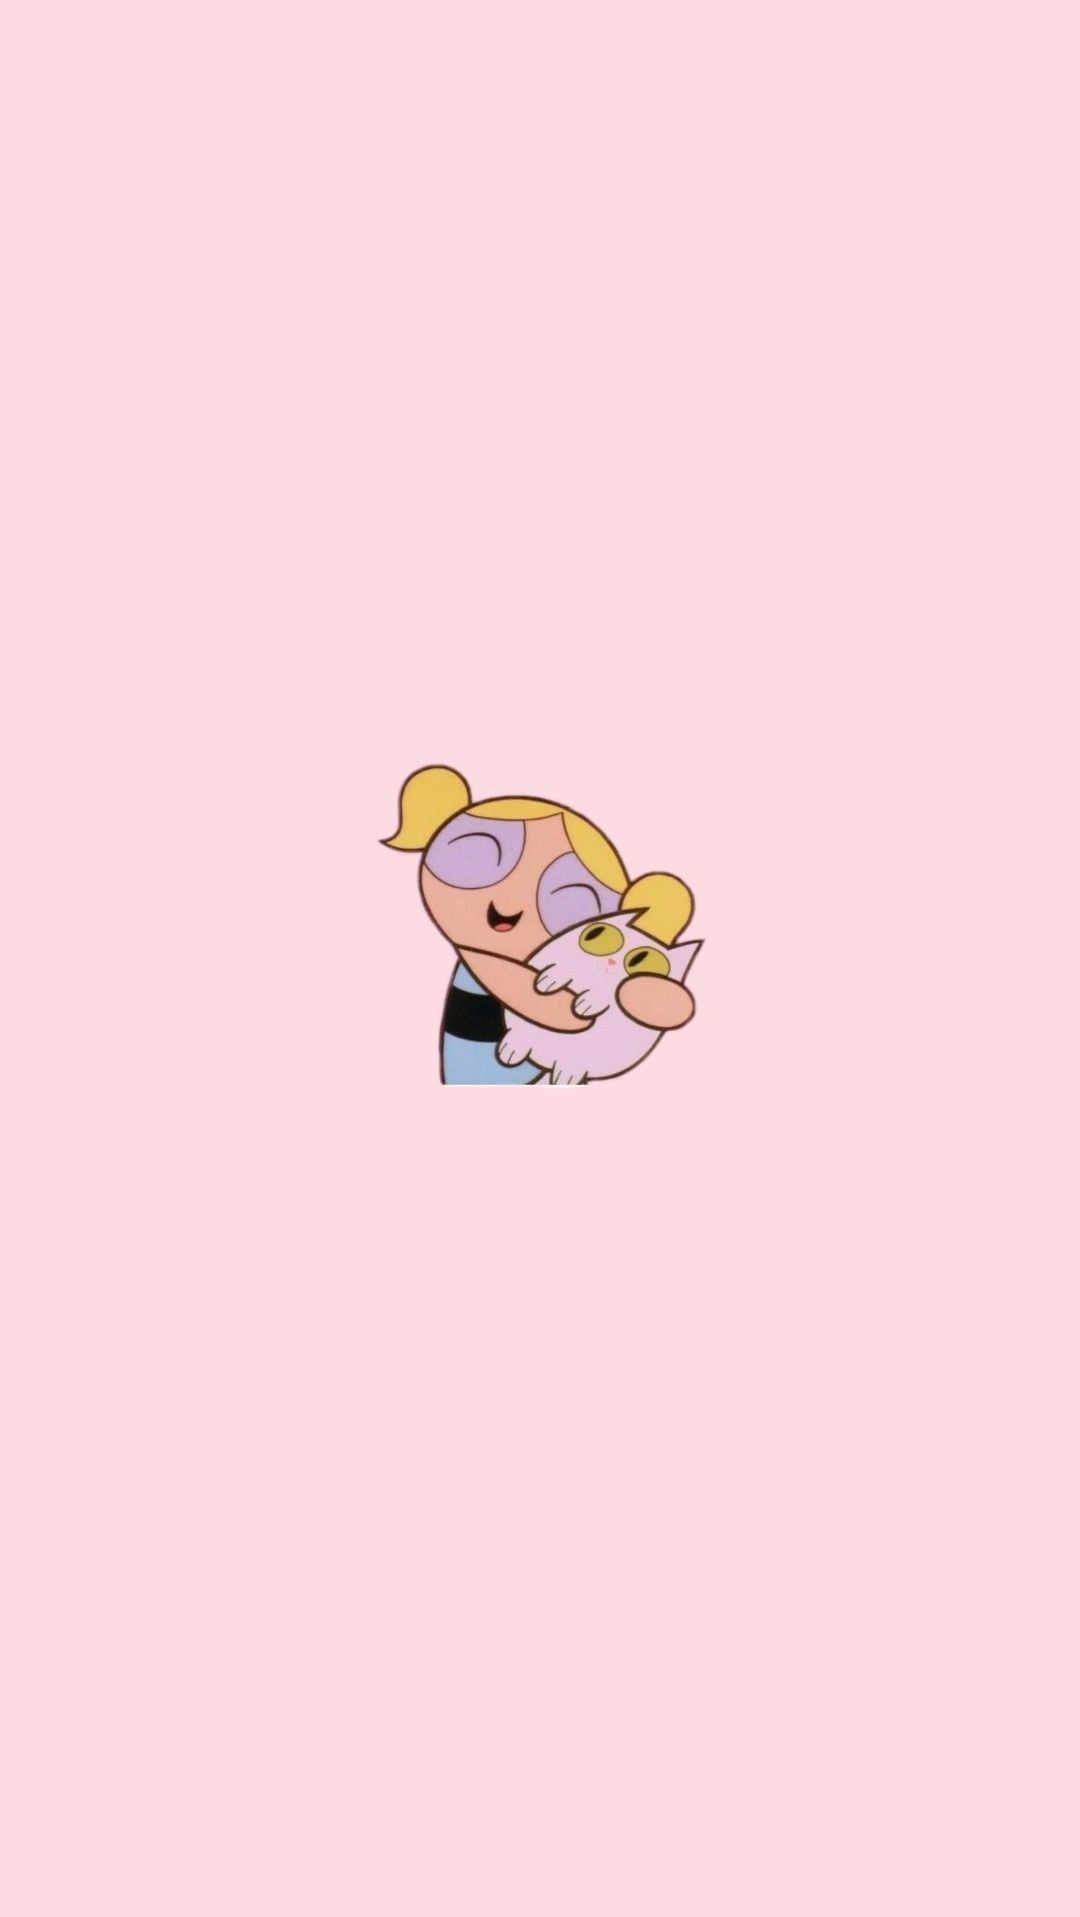 Bubbles from the Powerpuff Girls holding a bunny - Among Us